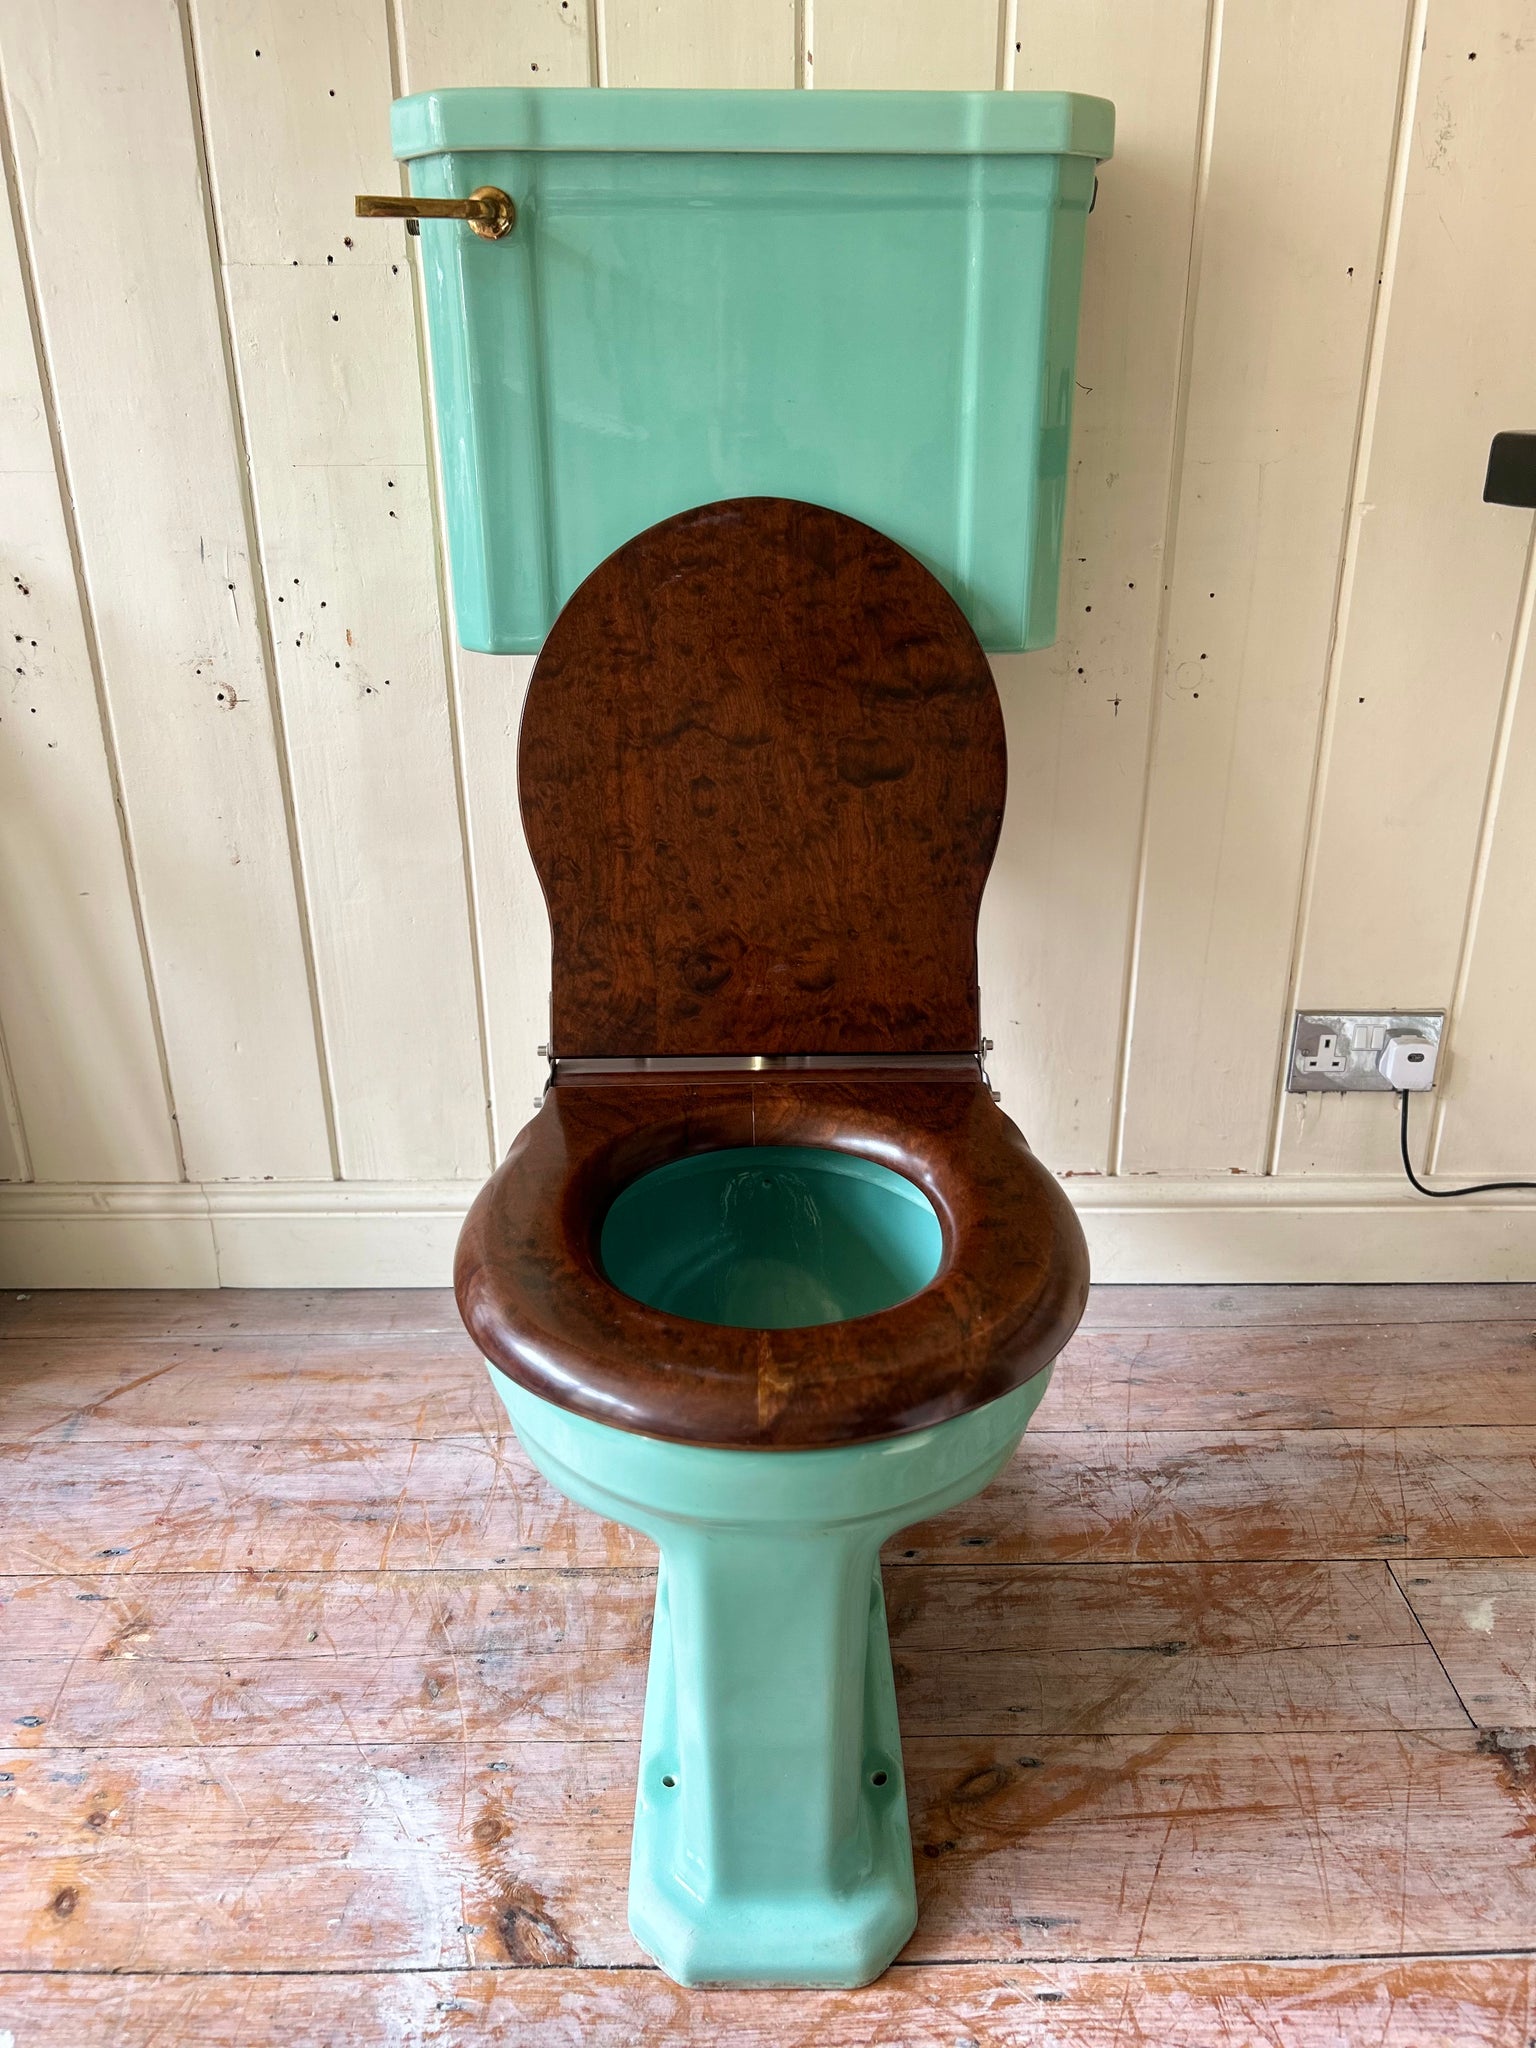 1950s Turquoise WC Suite by "American Standard"